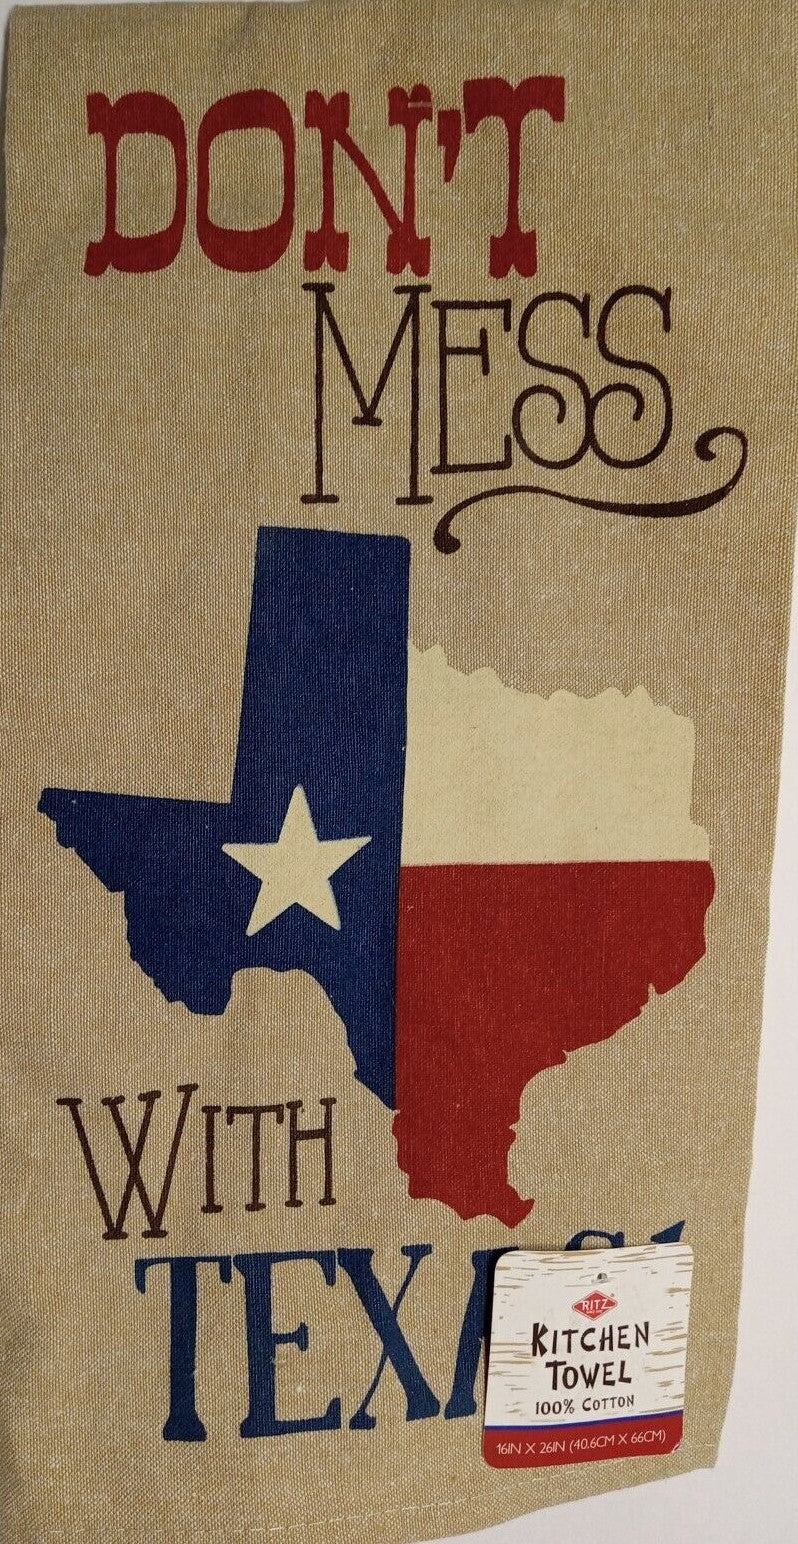 Don't Mess with Texas Kitchen Towel